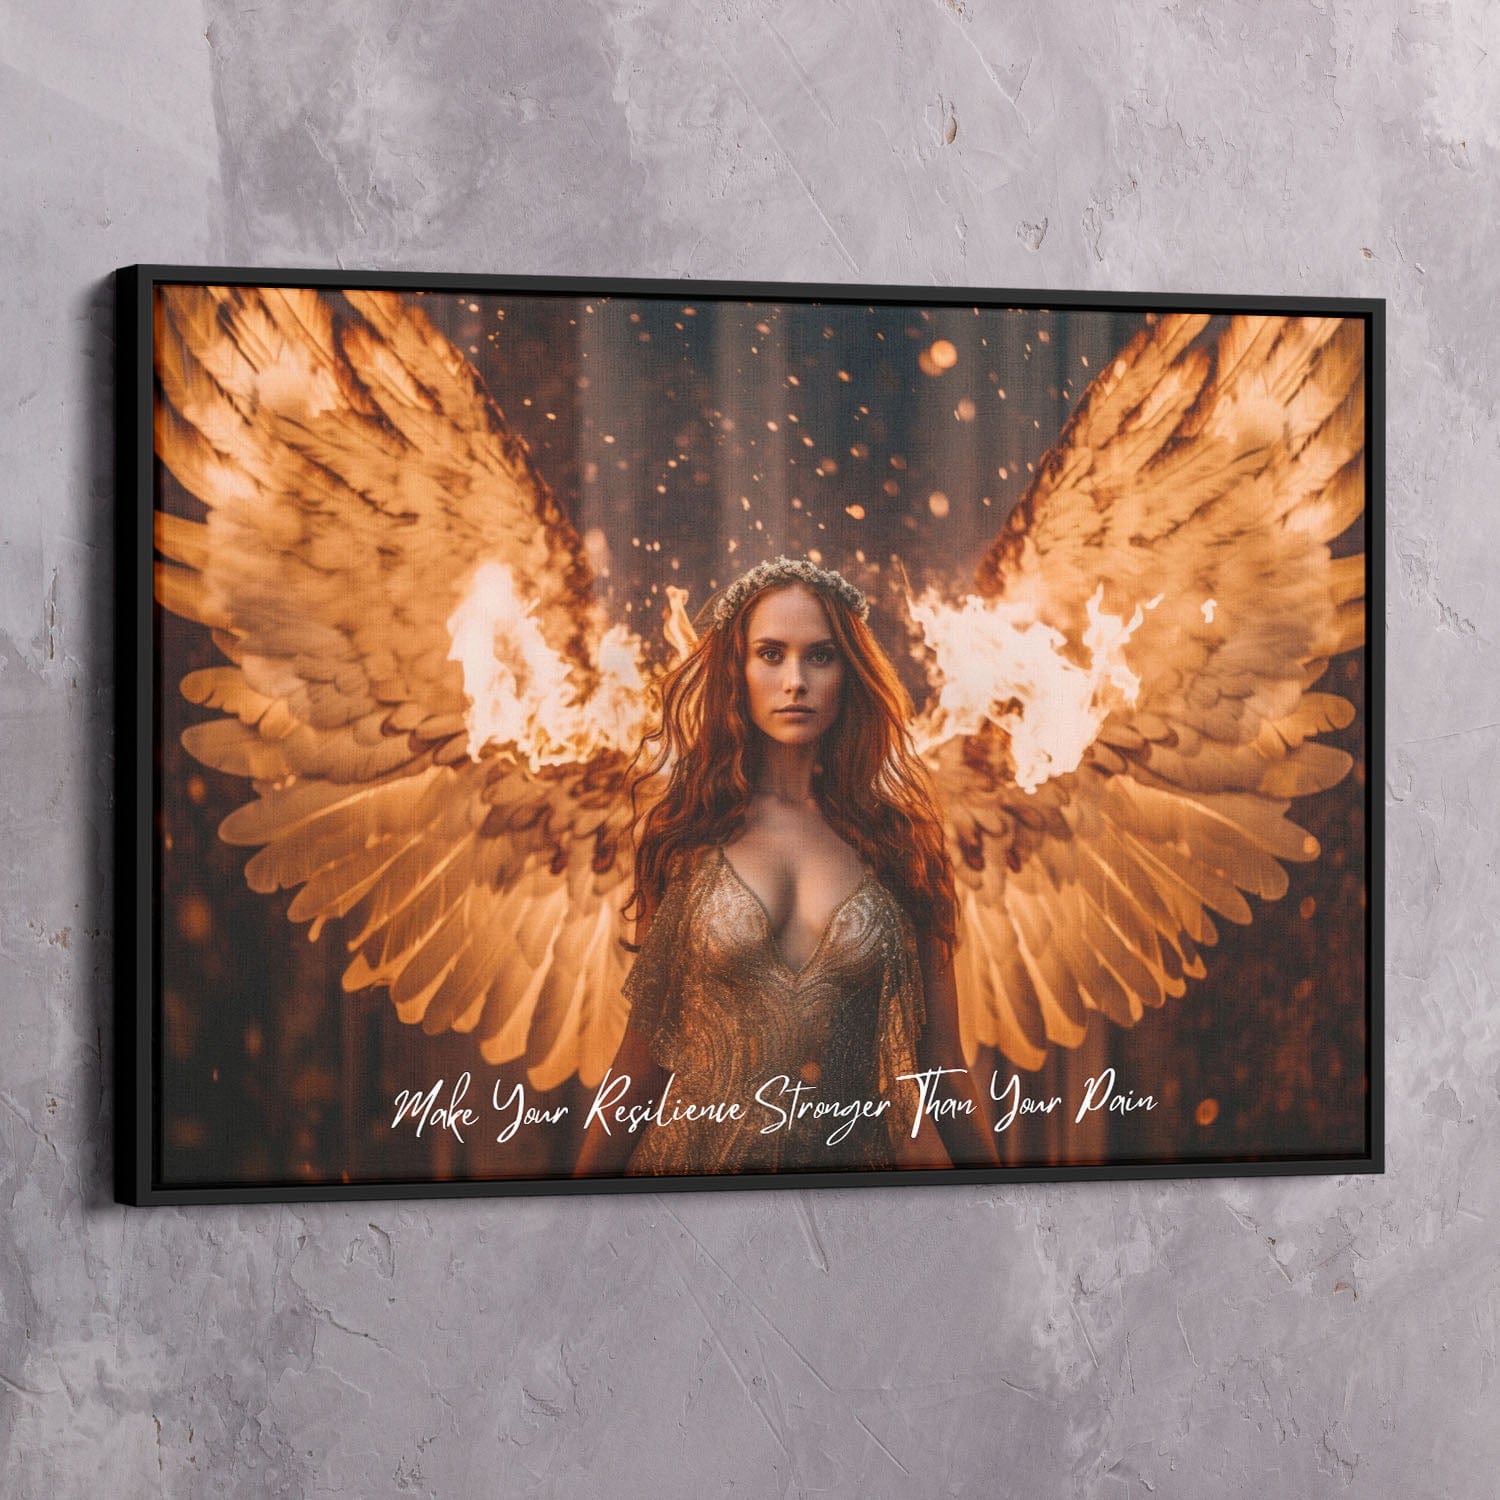 Angel on Fire - Resilience Stronger Than Pain Quote Wall Art | Inspirational Wall Art Motivational Wall Art Quotes Office Art | ImpaktMaker Exclusive Canvas Art Landscape